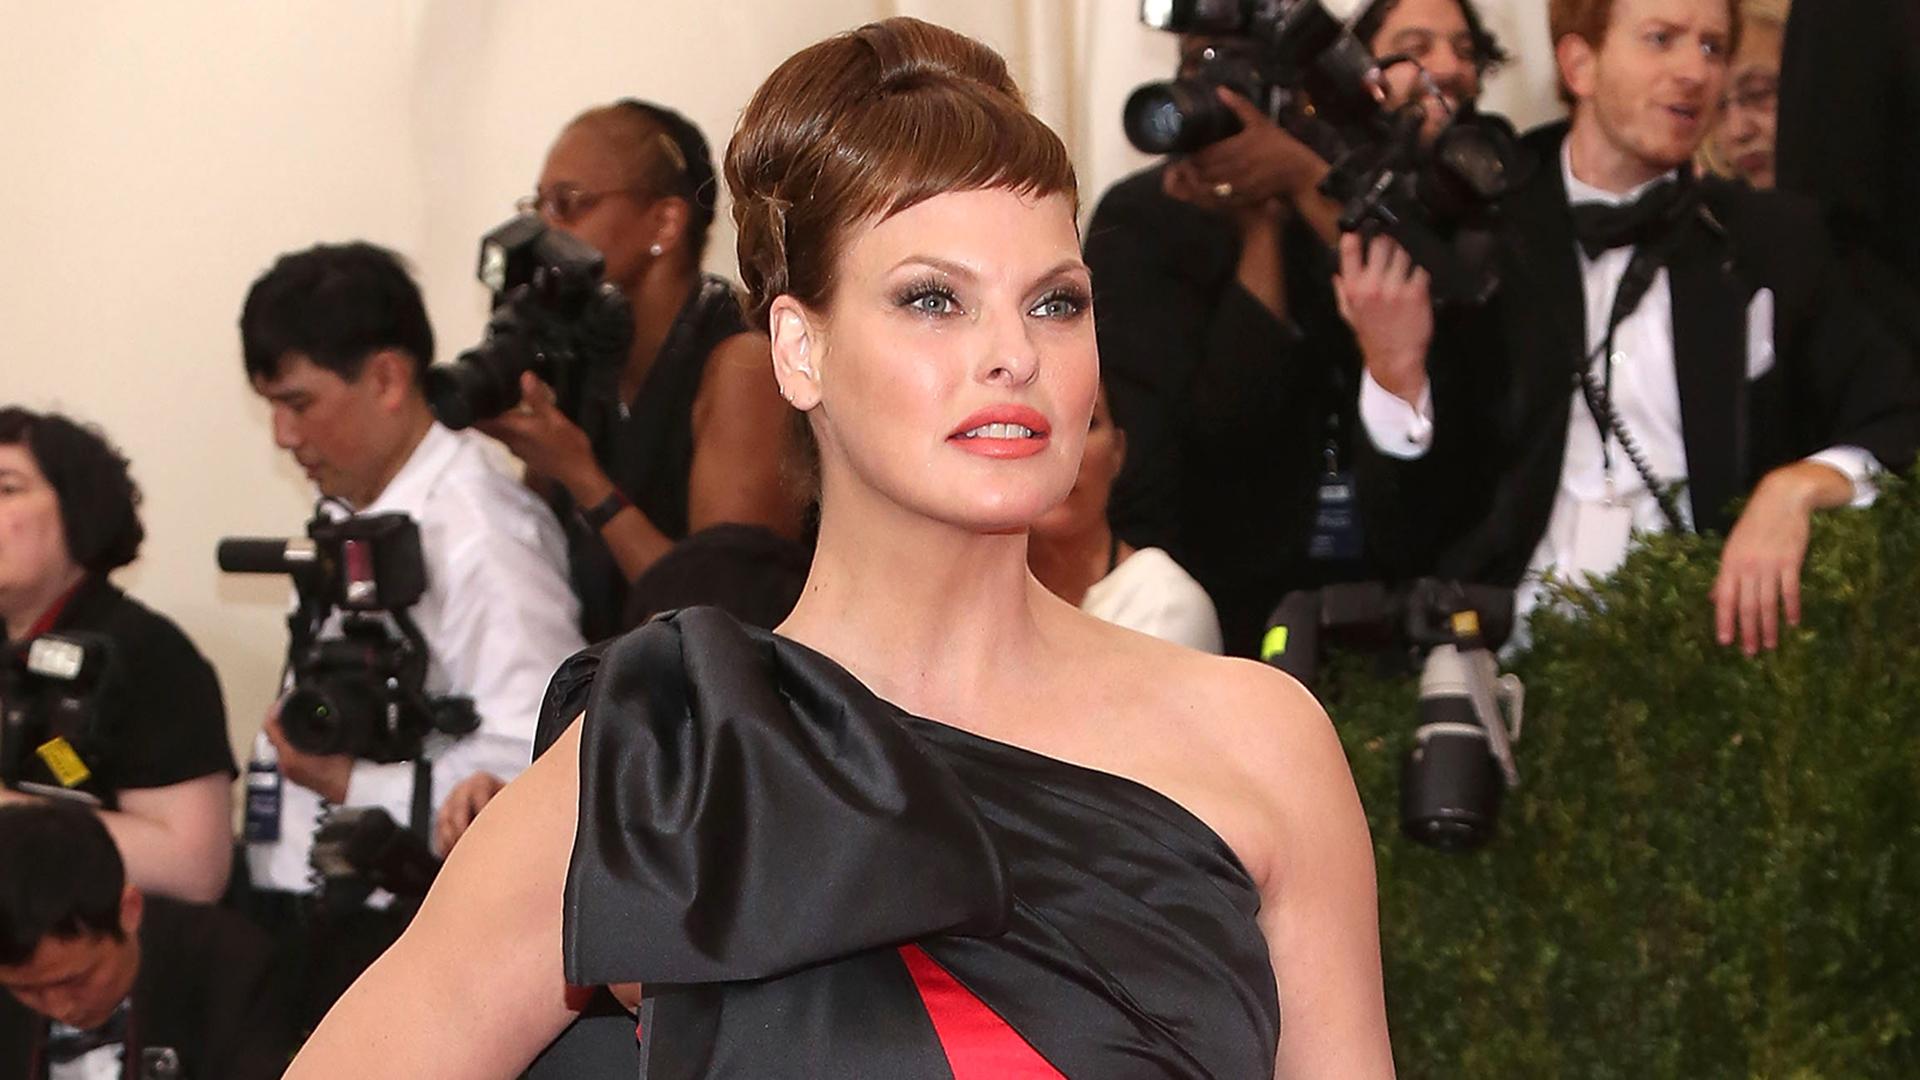 Linda Evangelista Won’t Ever Pose In Swimsuits Or Let Anyone Touch Her Following Botched Procedure